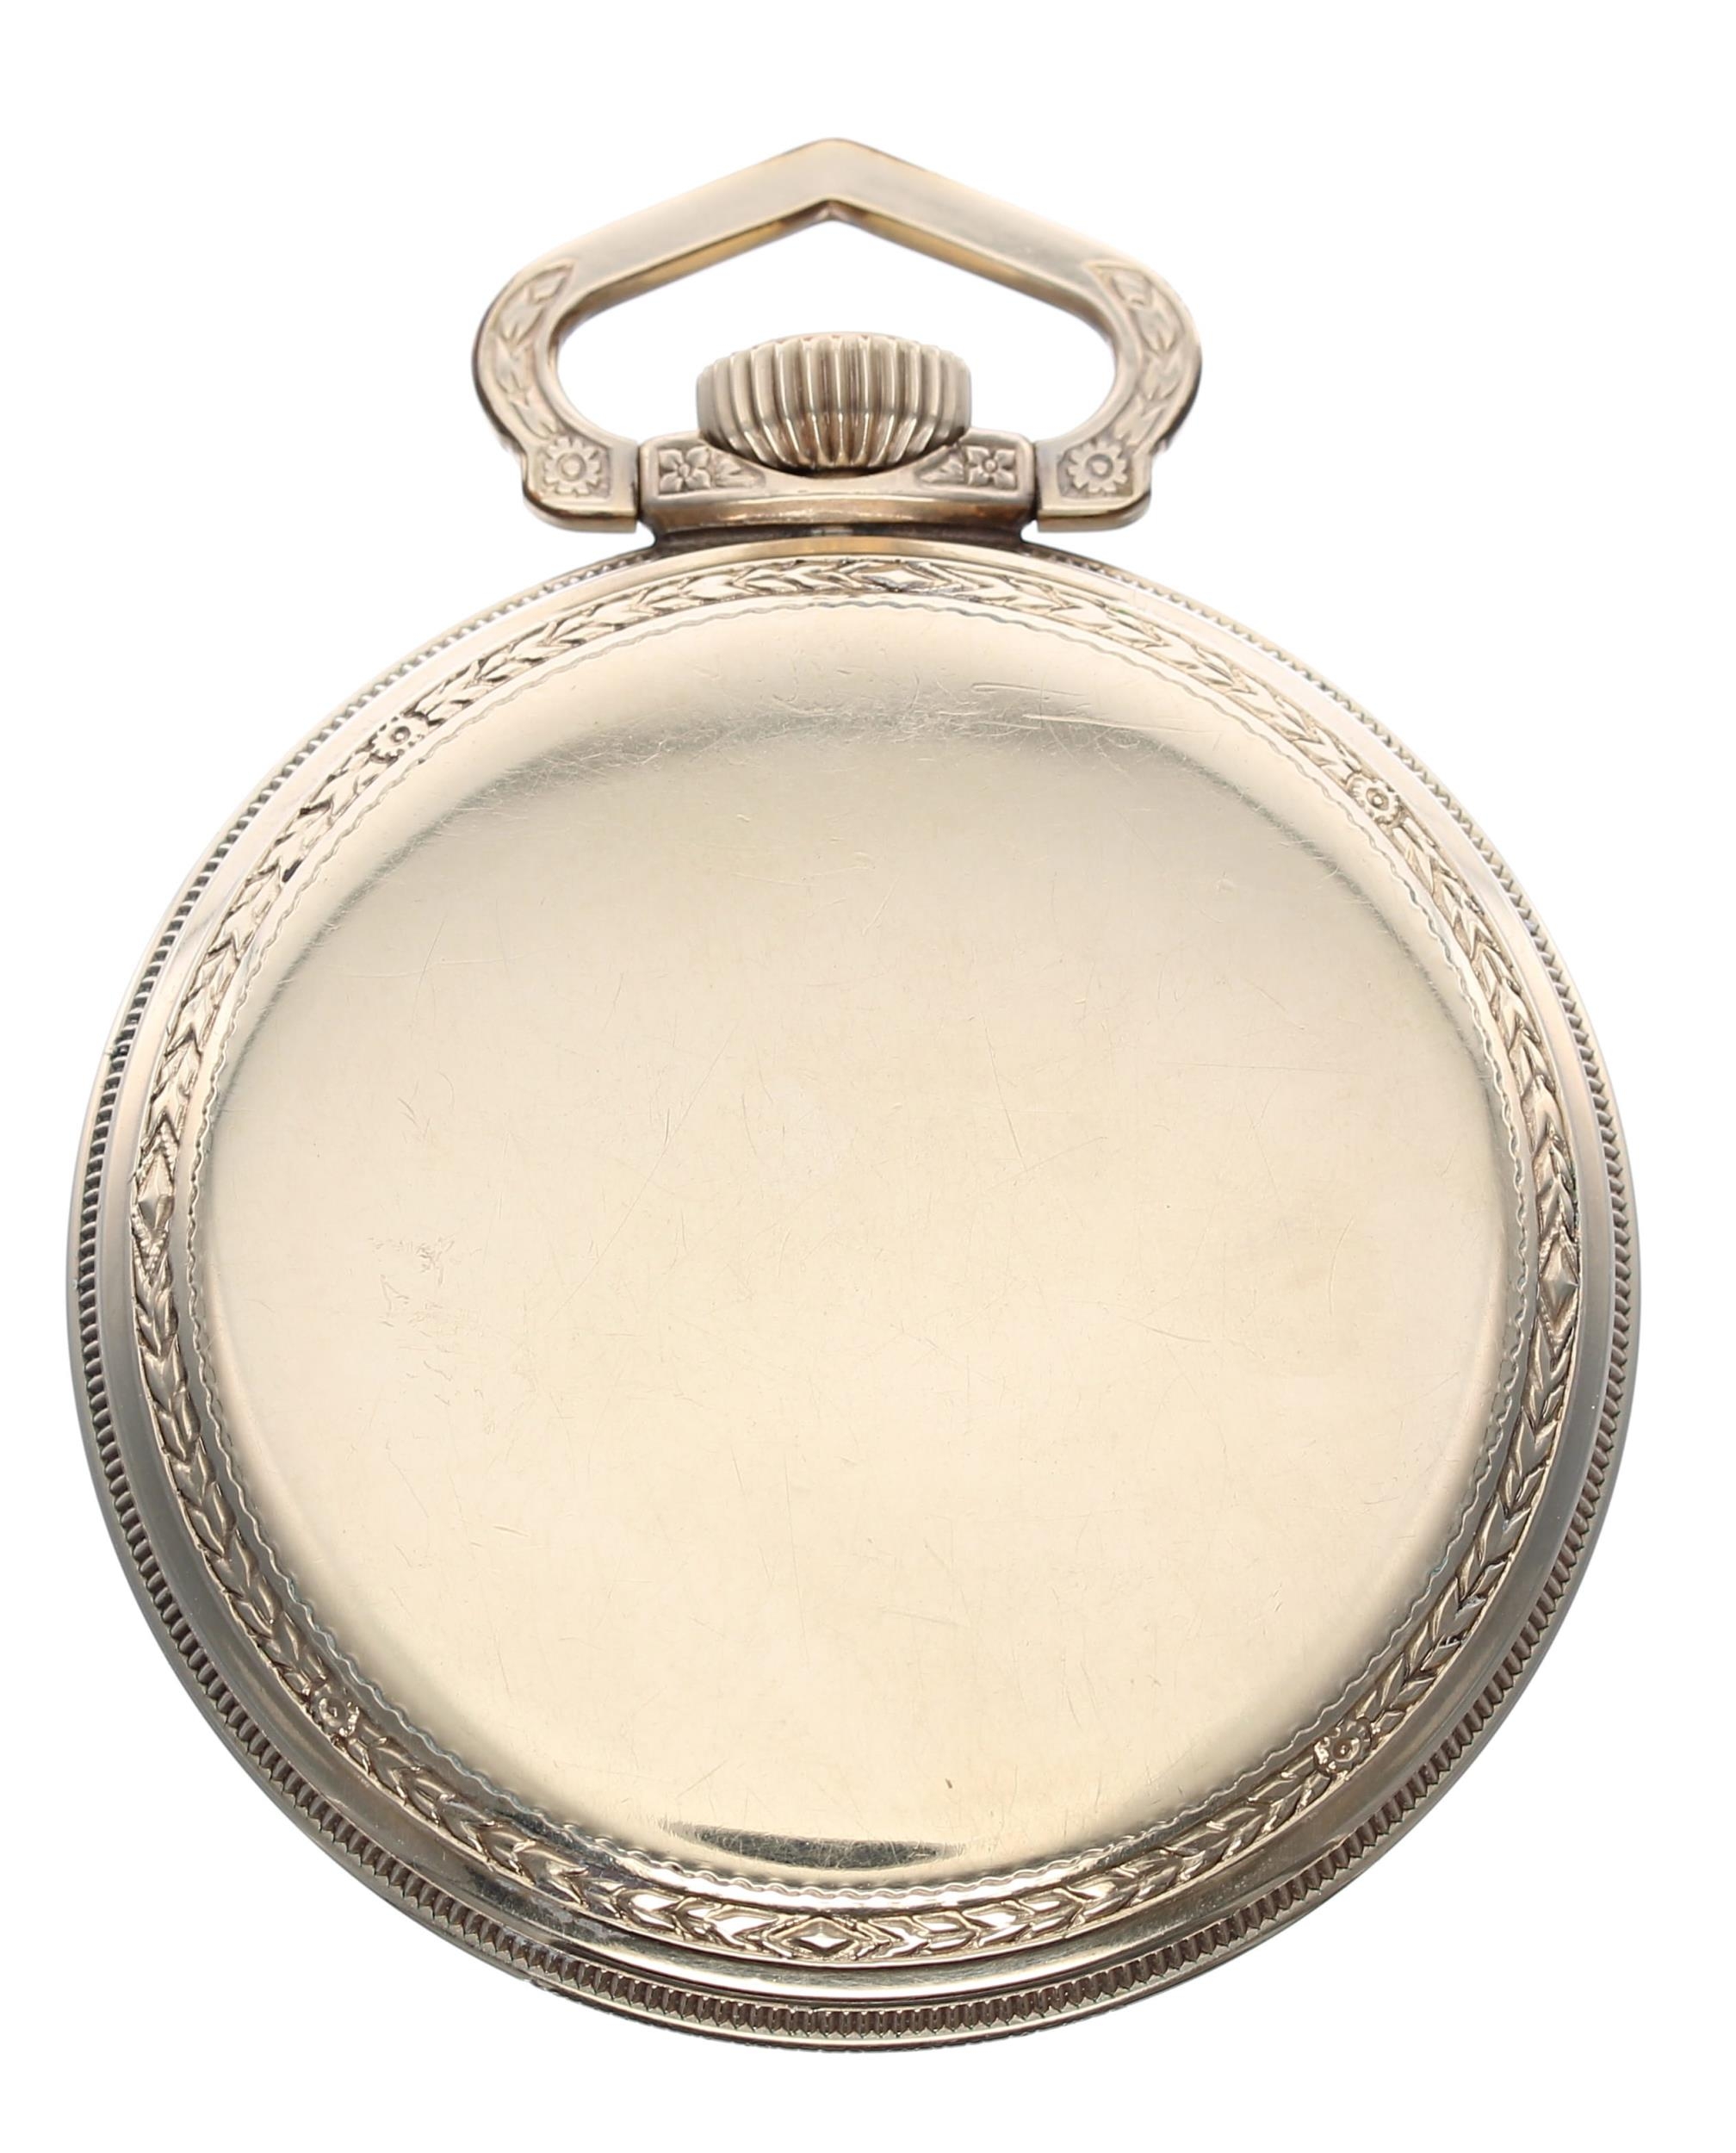 Illinois Watch Co. 'Illinois Central' 10k rolled gold lever pocket watch, circa 1917, signed 17 - Bild 4 aus 4